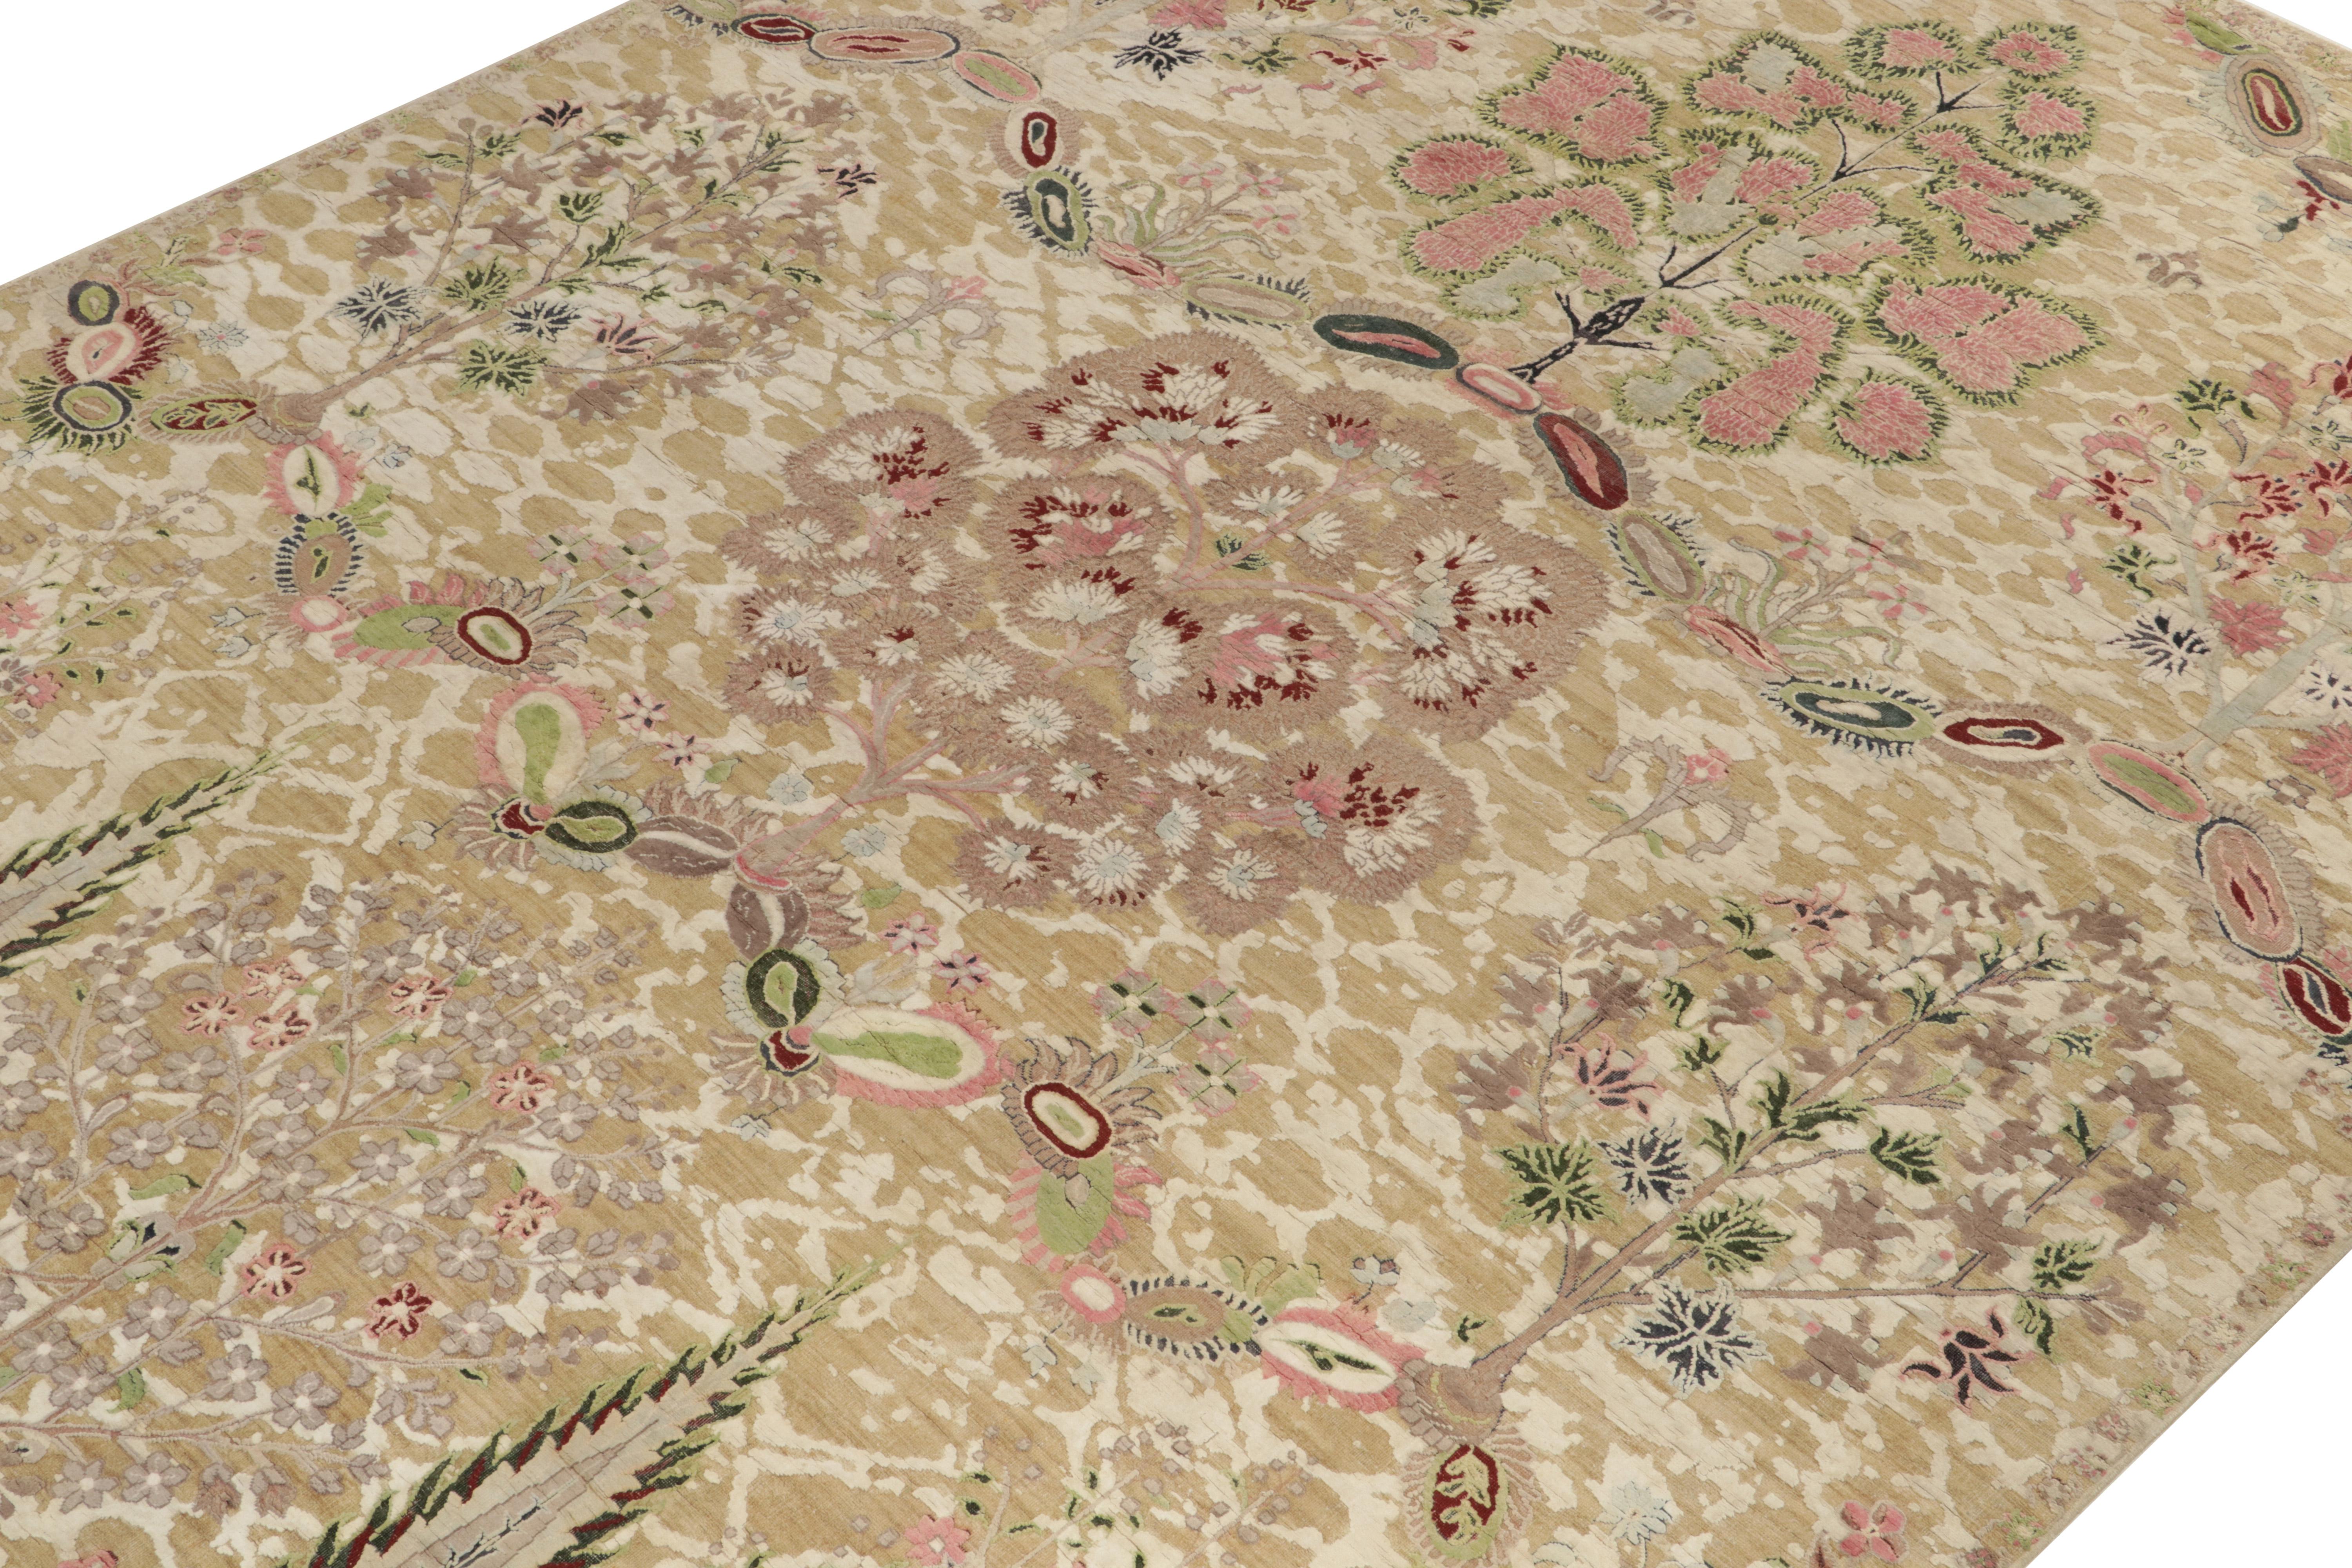 Hand-Knotted Rug & Kilim’s Classic Style Rug in Green, Pink and Beige-Brown Floral Pattern For Sale